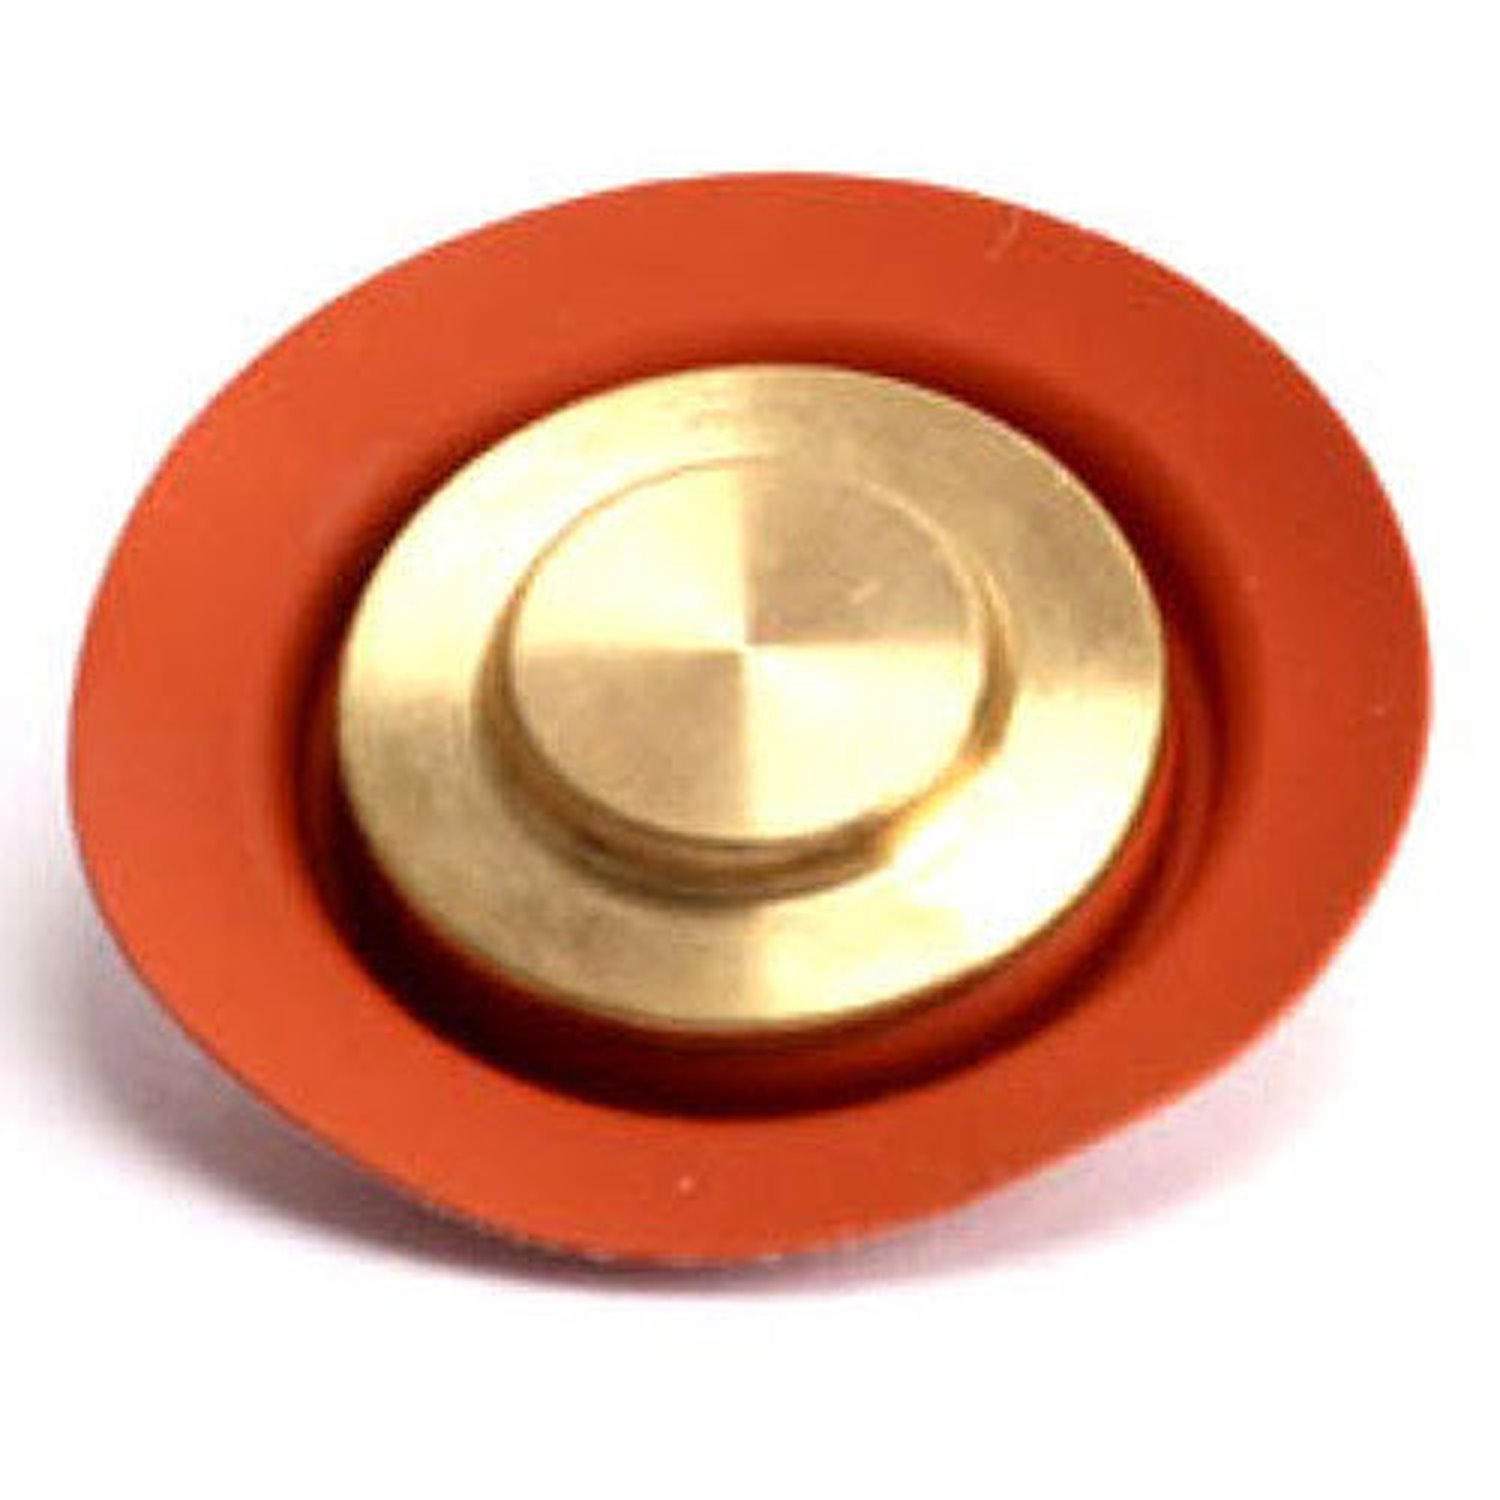 FPR 800 V2 Replacement Diaphragm Assembly